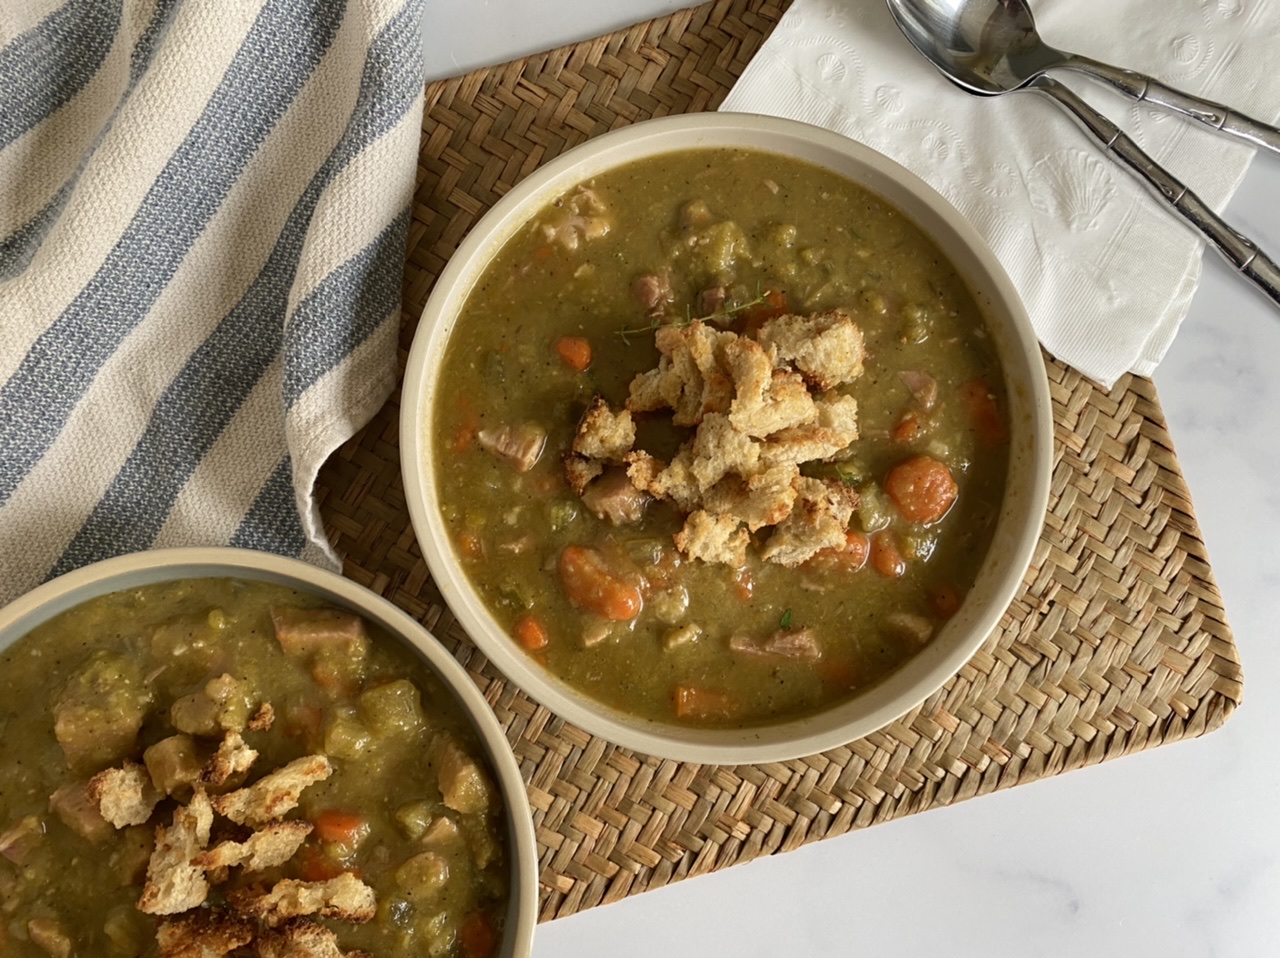 54CA60D8 8812 478B 9B4D 77CD60AB8955 - The BEST Split Pea Soup with Homemade Croutons